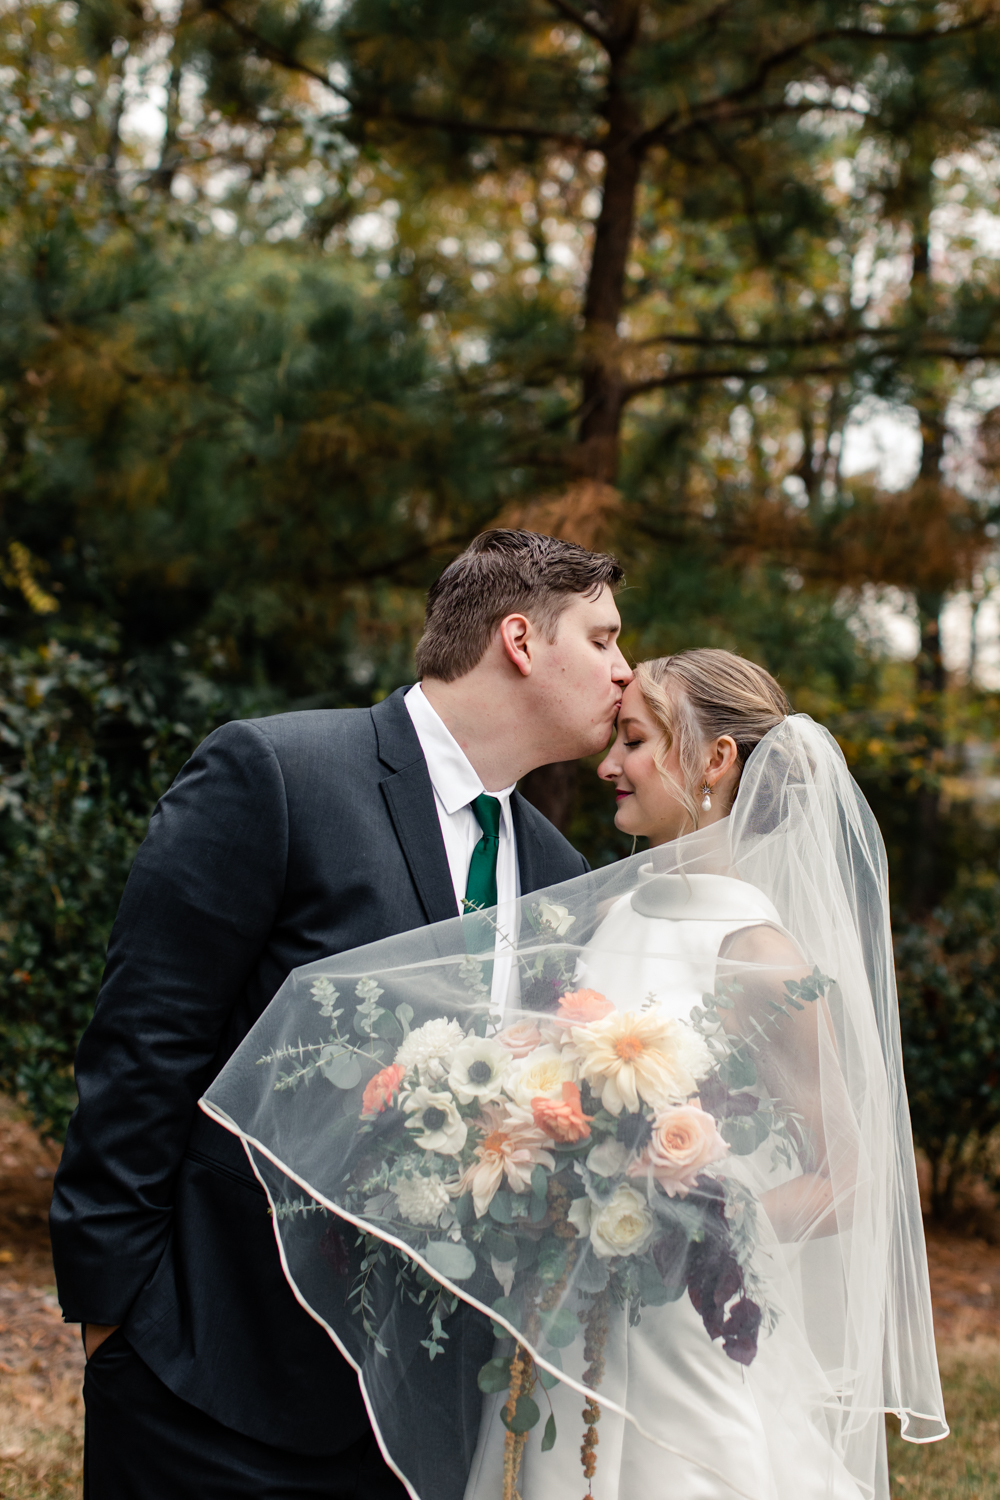 Groom, in white suit and green tie, kissing the forehead of his bride, in white dress and veil with green and red flowers at Carmel Country Club wedding venue. Photographed by Charlotte wedding photography.